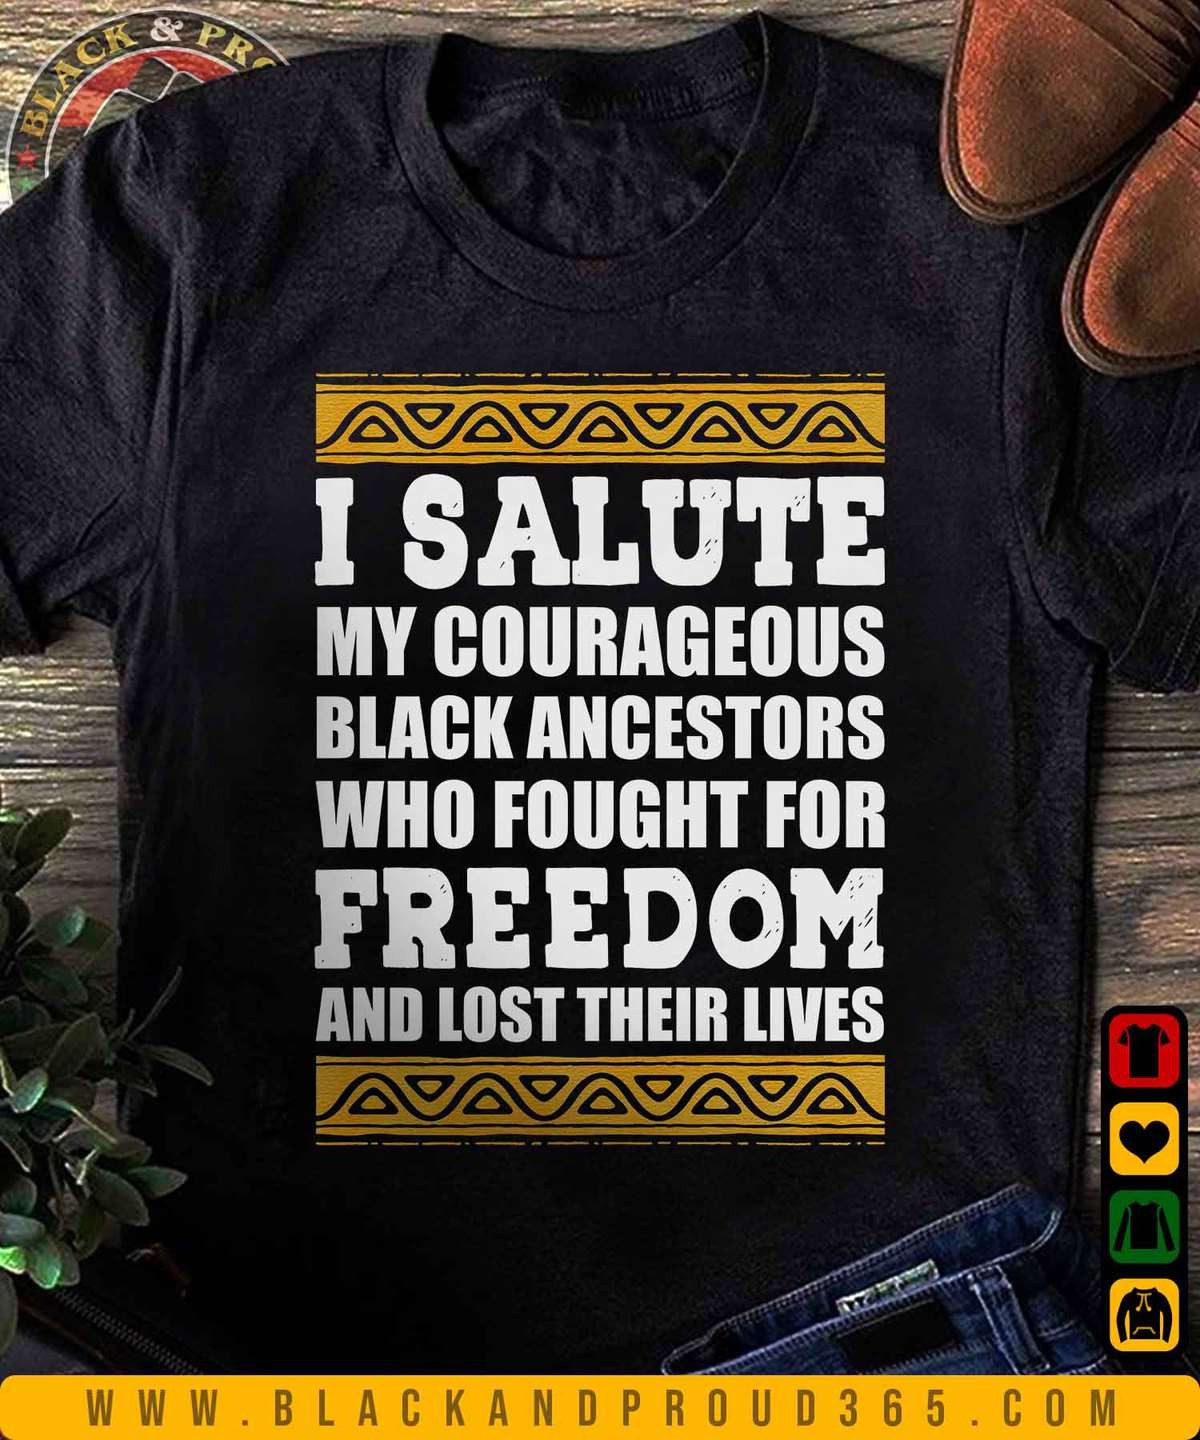 I salute my courageous black ancestors who fought for freedom and lost their lives